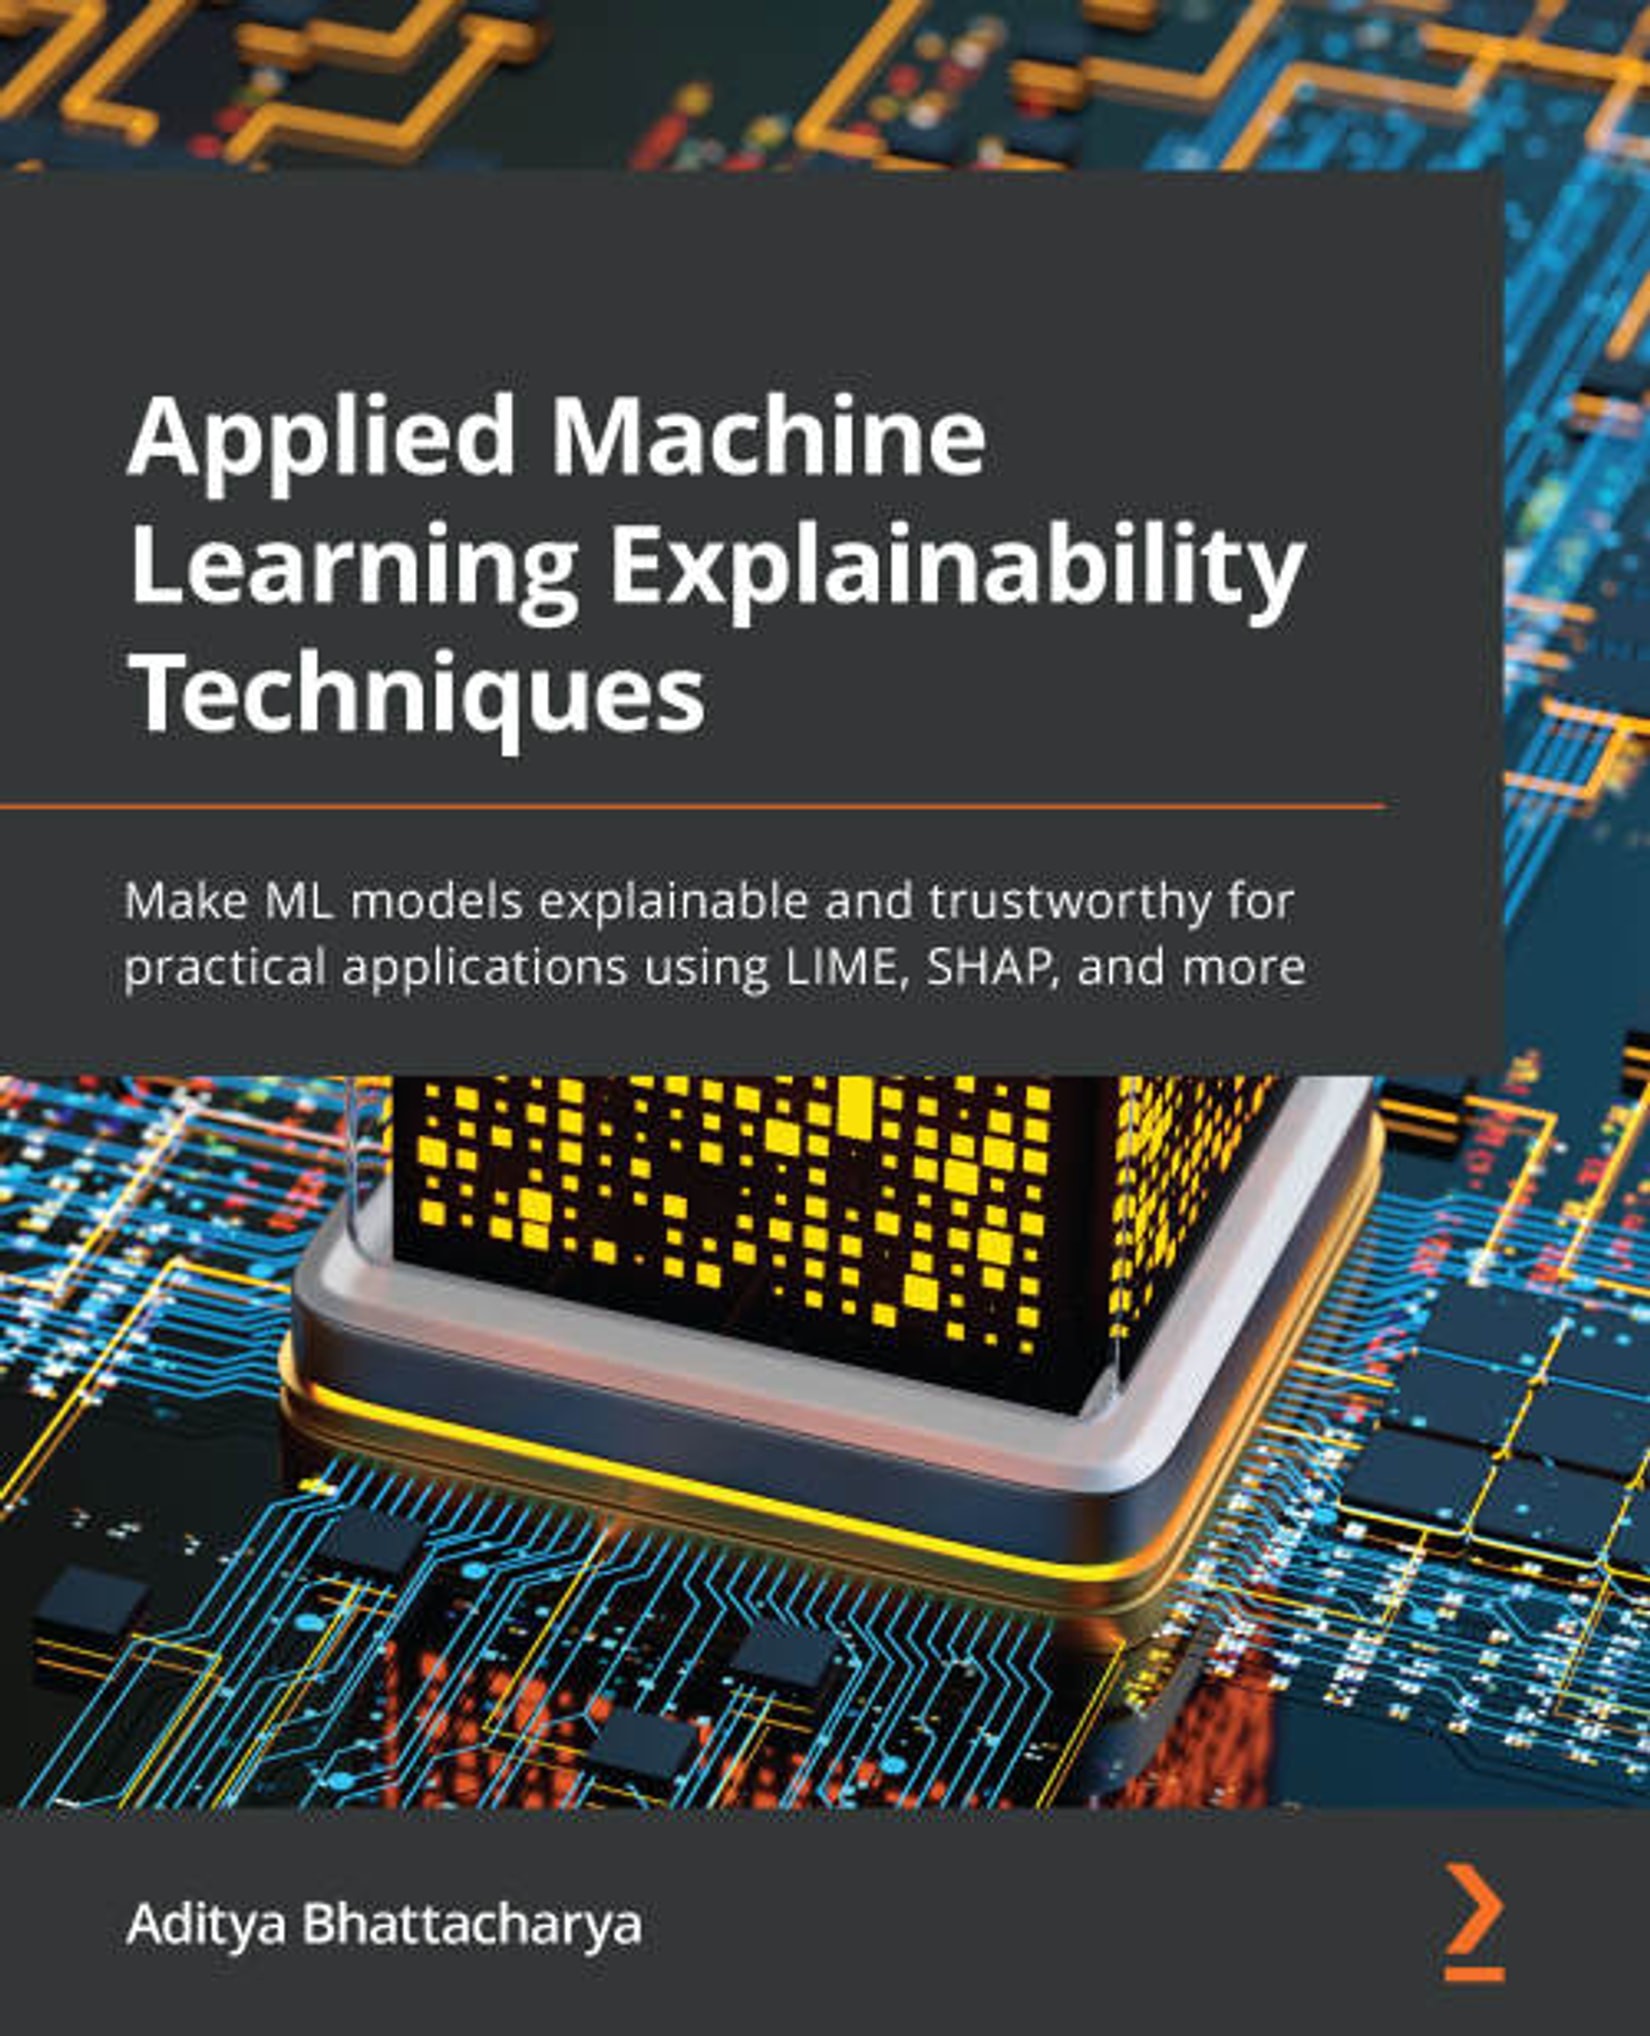 Applied Machine Learning Explainability Techniques: Make ML Models Explainable and Trustworthy for Practical Applications Using LIME, SHAP, and More